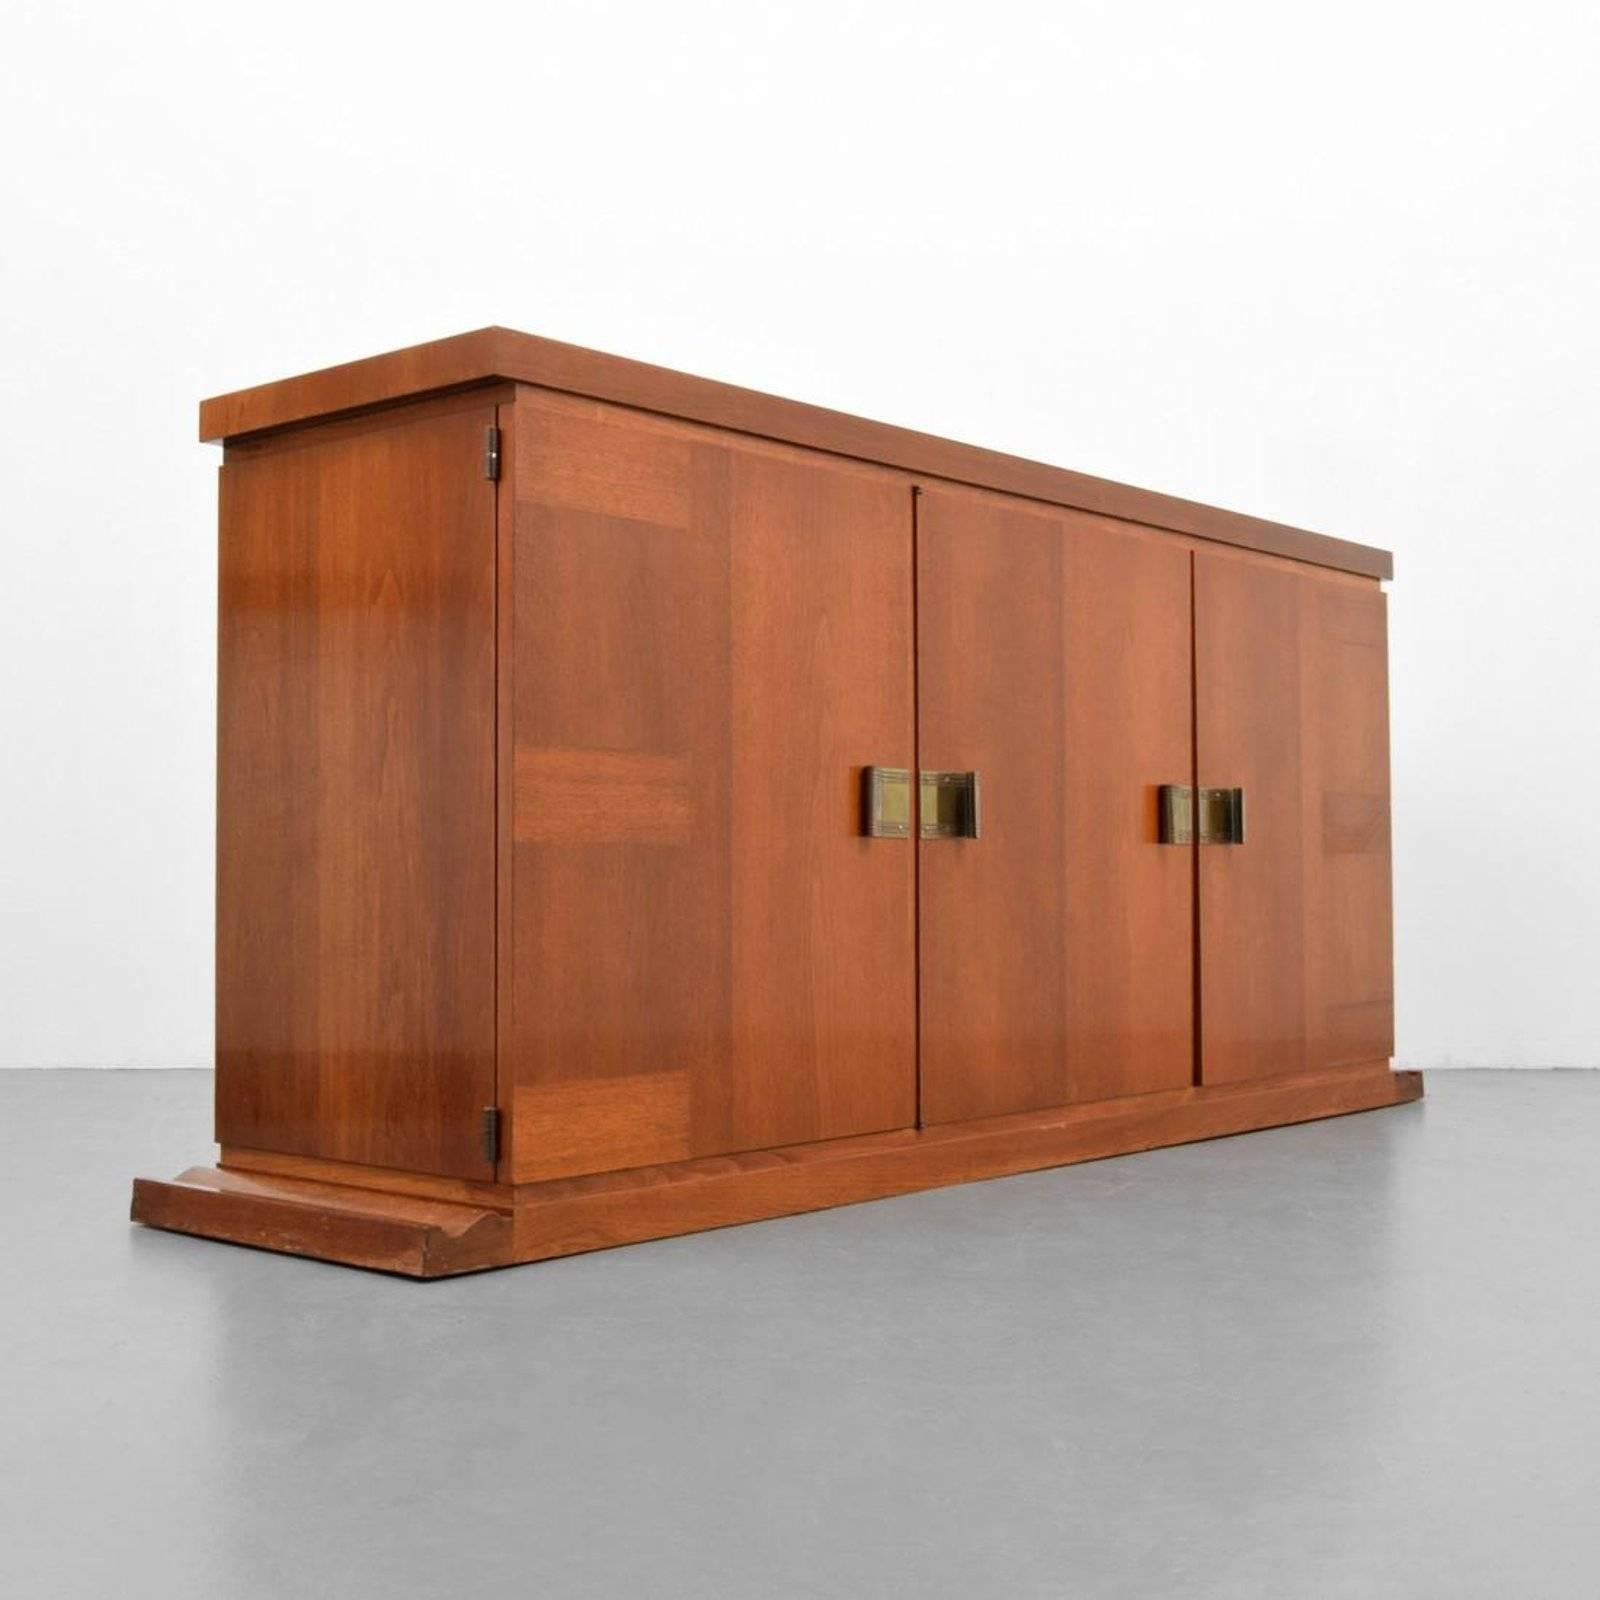 Cabinet has one door revealing four drawers, and a pair of doors revealing four larger drawers by Tommi Parzinger for Parzinger Originals. Cabinet was authenticated by Todd Merrill, noteworthy collector and dealer of 20th century modern and